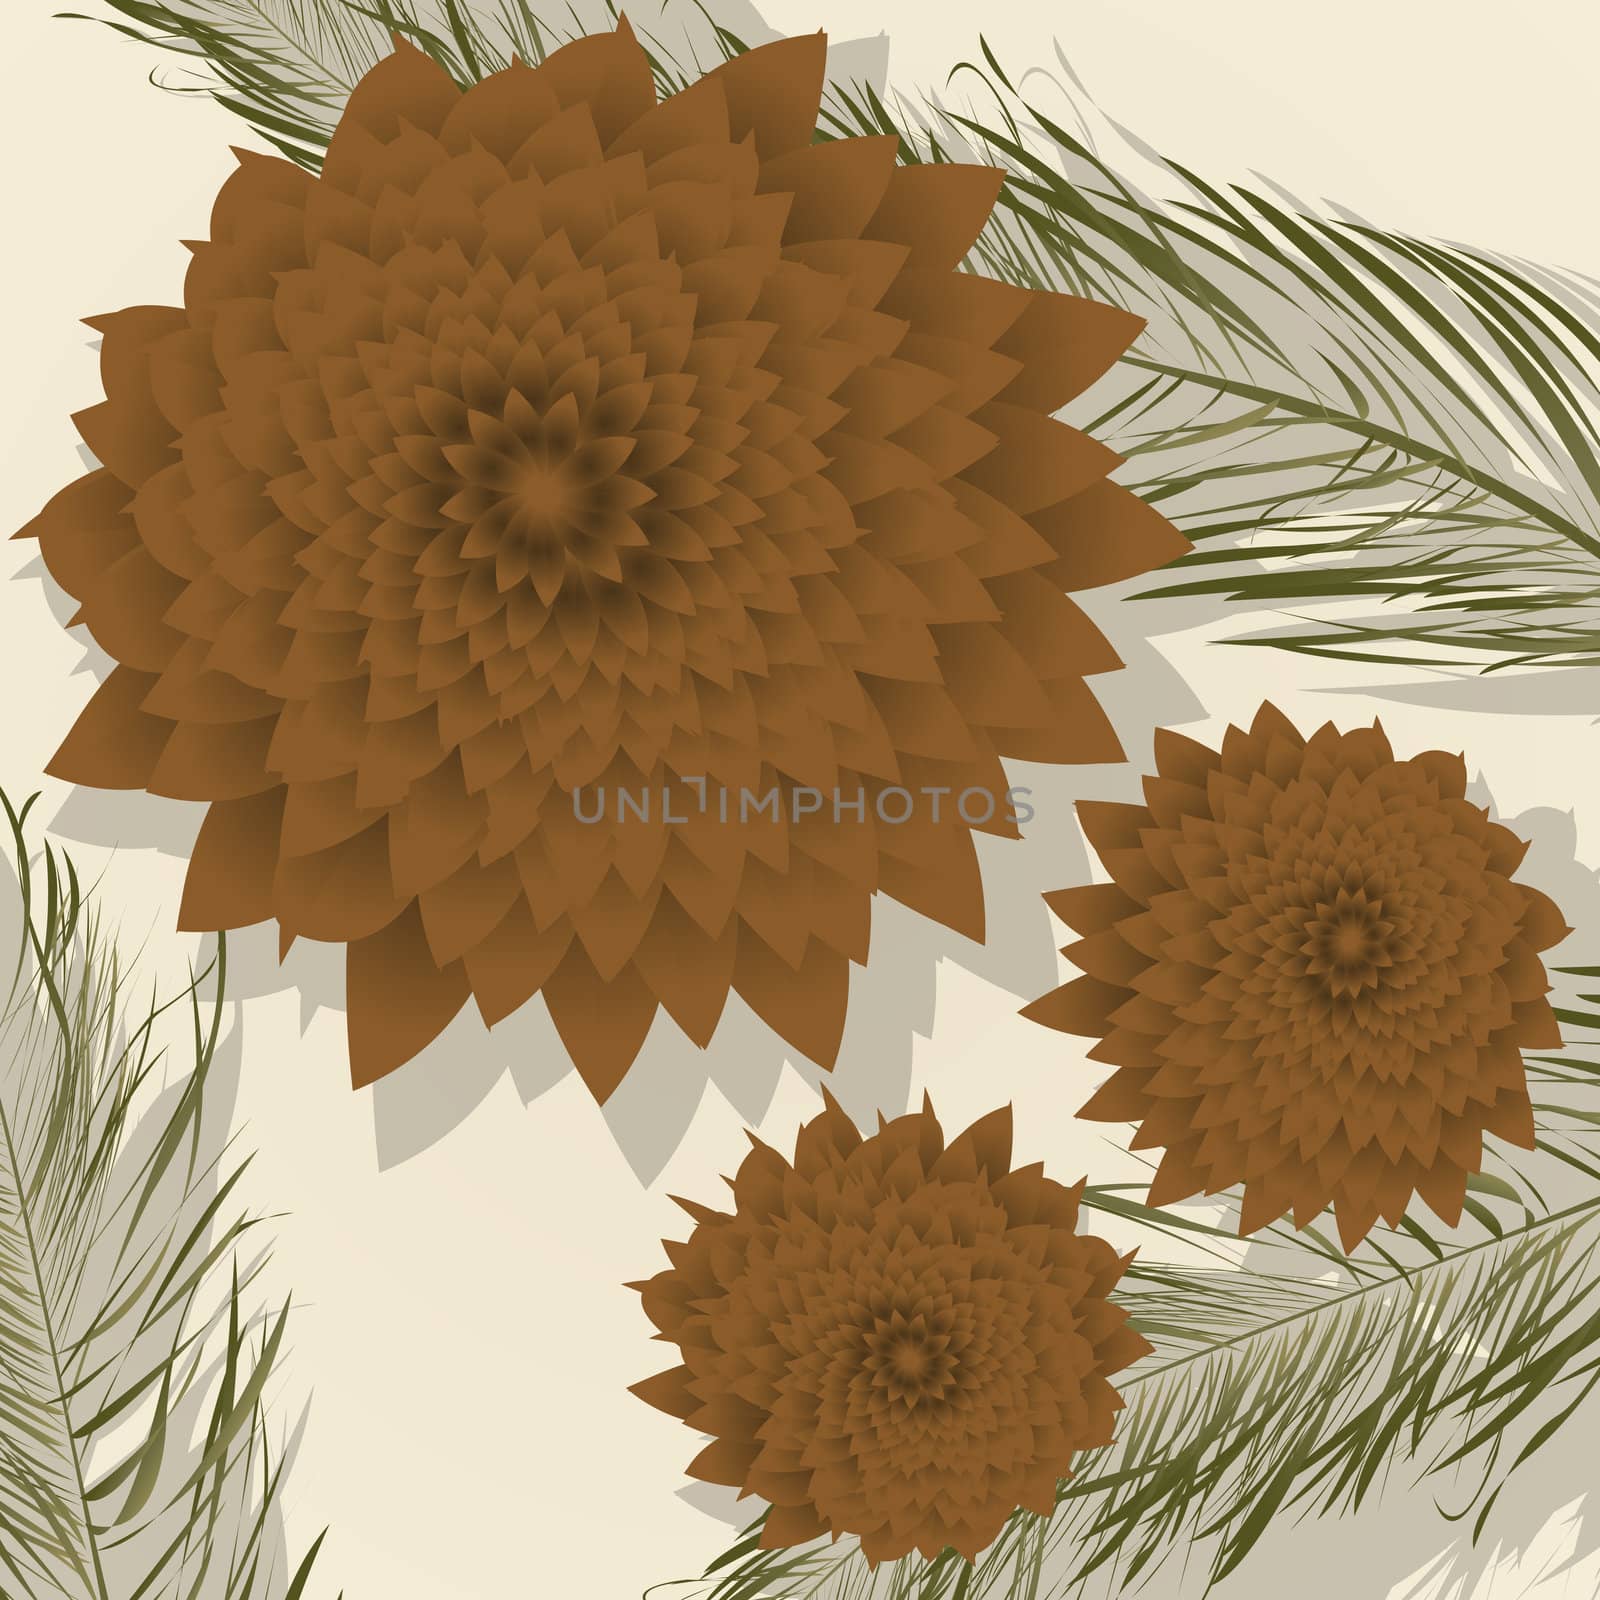 Pine cones by Lirch